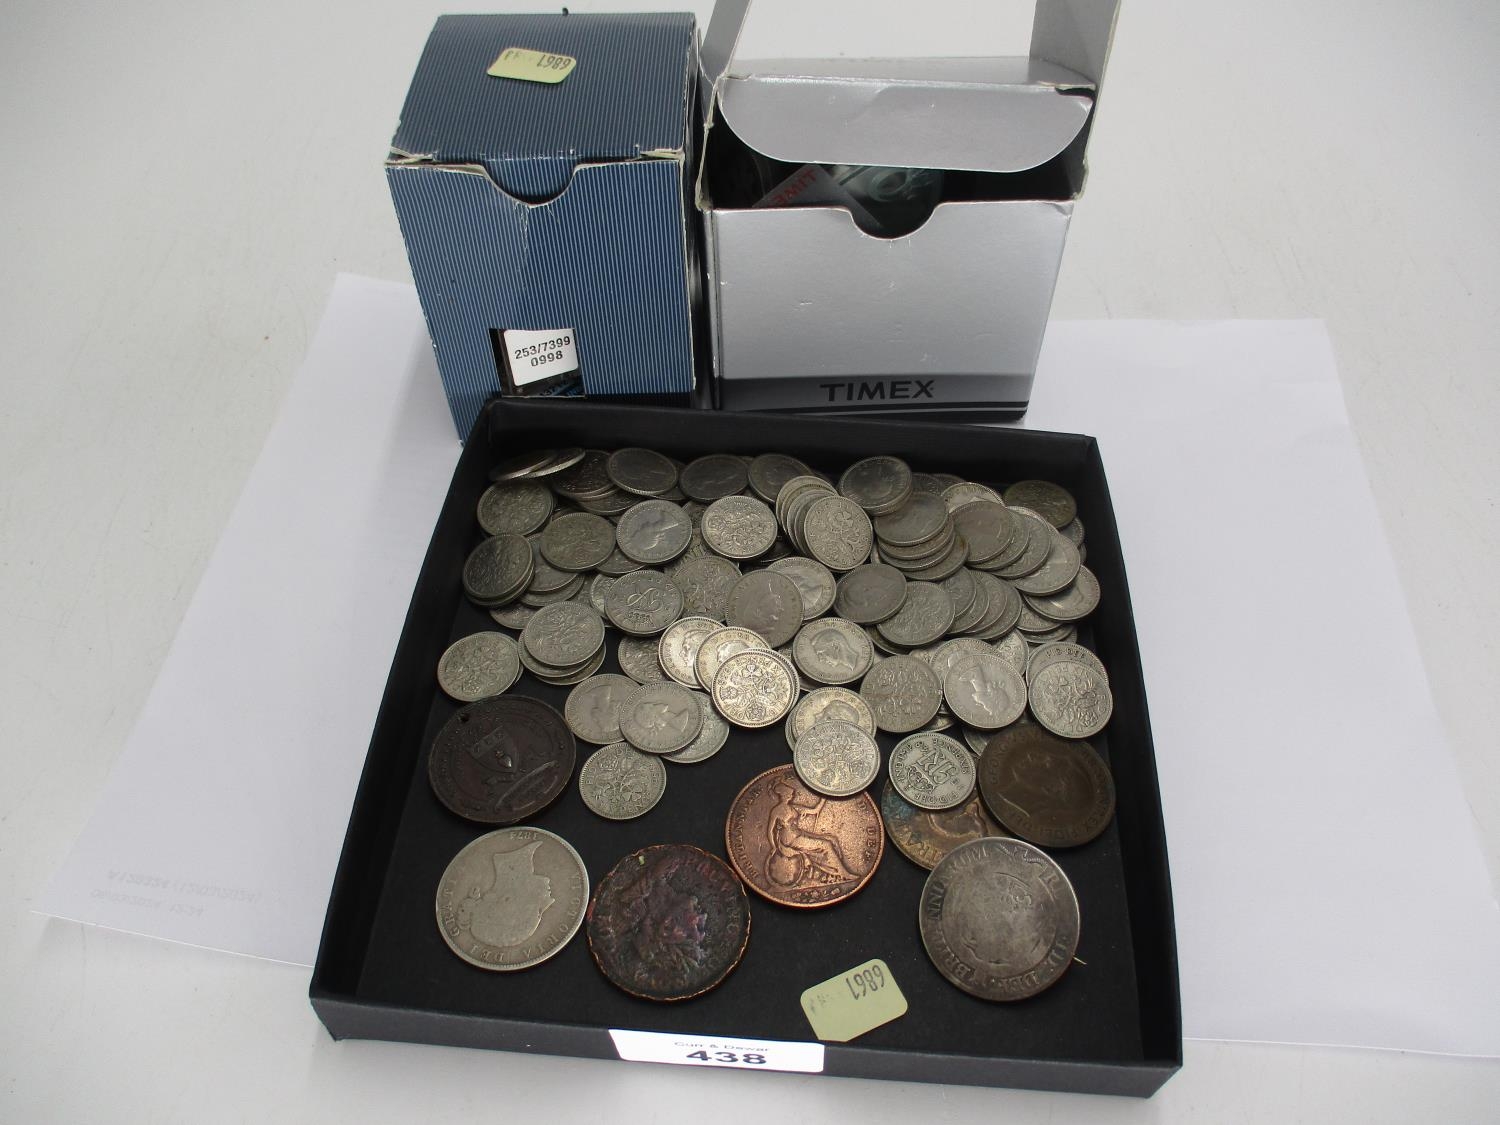 Two Timex Watches, Coin Brooch and Other Coins